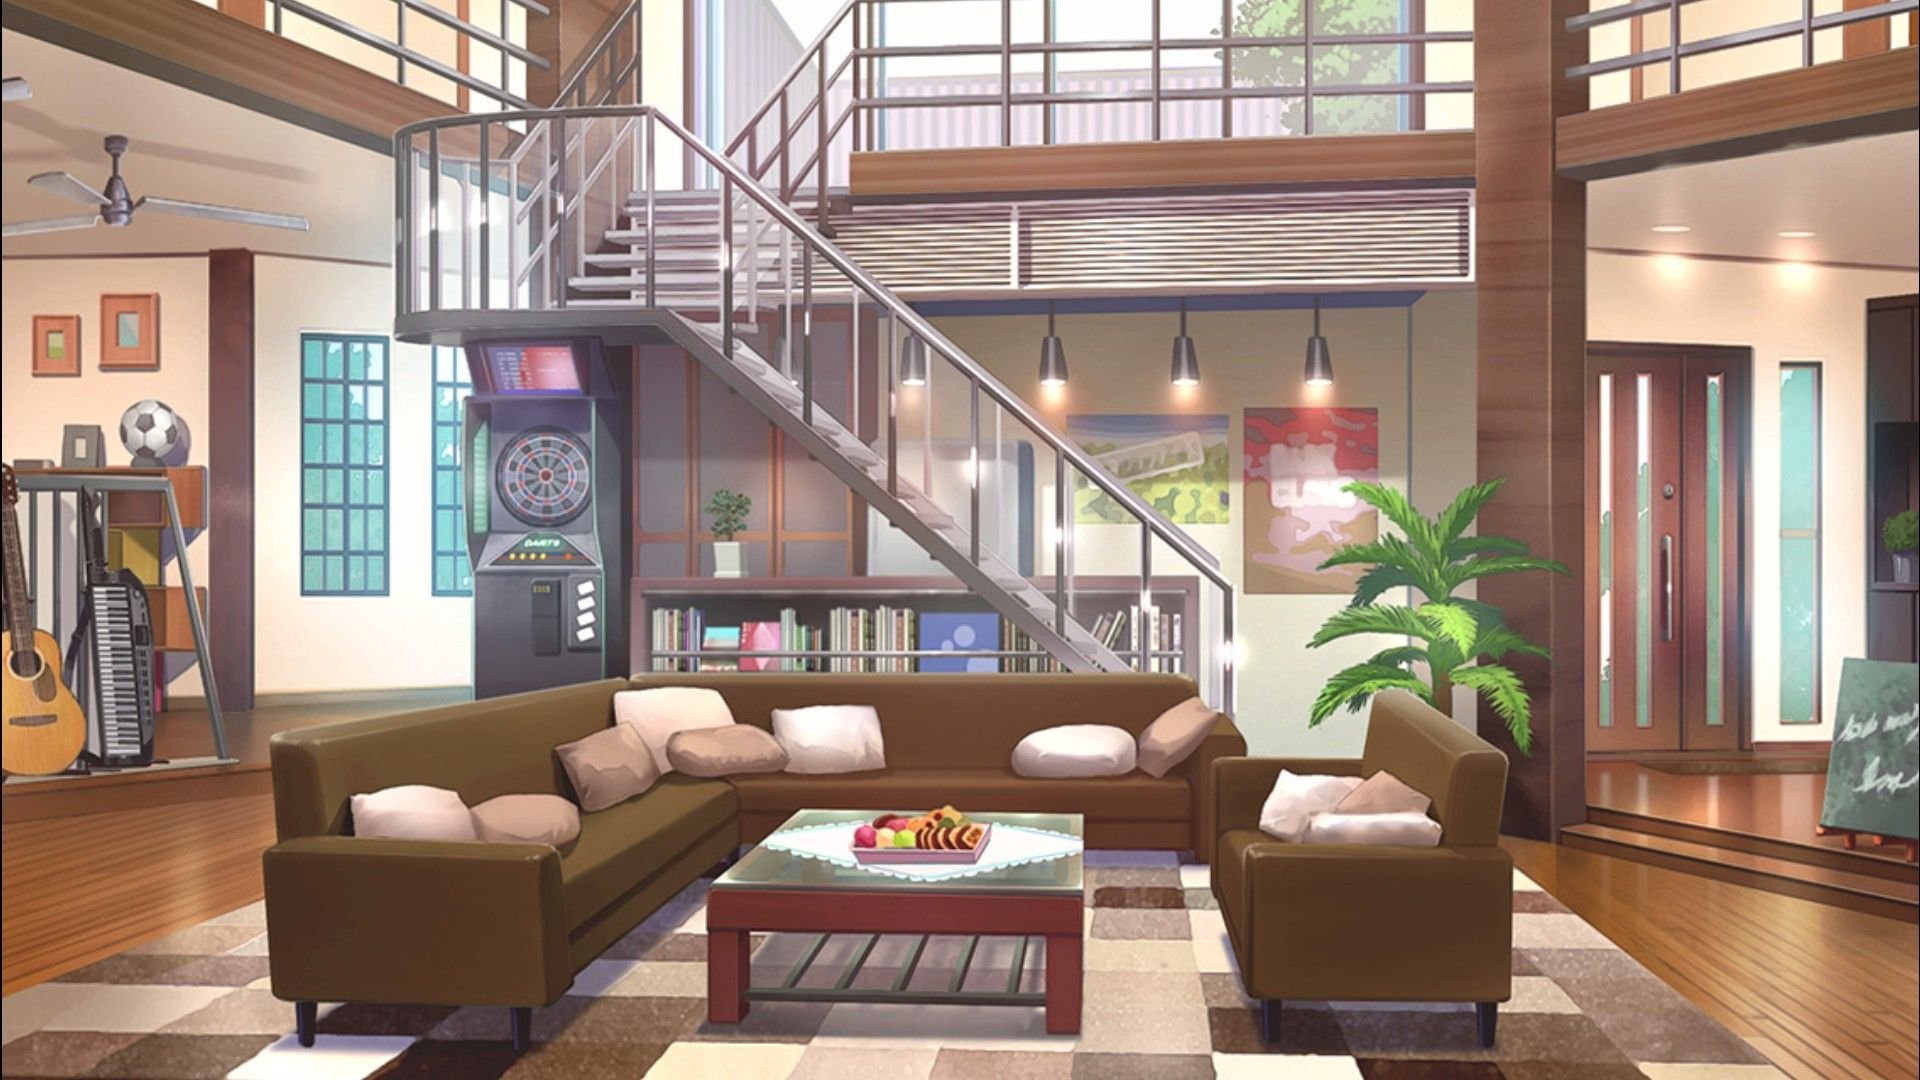 Anime background material-living room with sea... - Stock Illustration  [104524705] - PIXTA